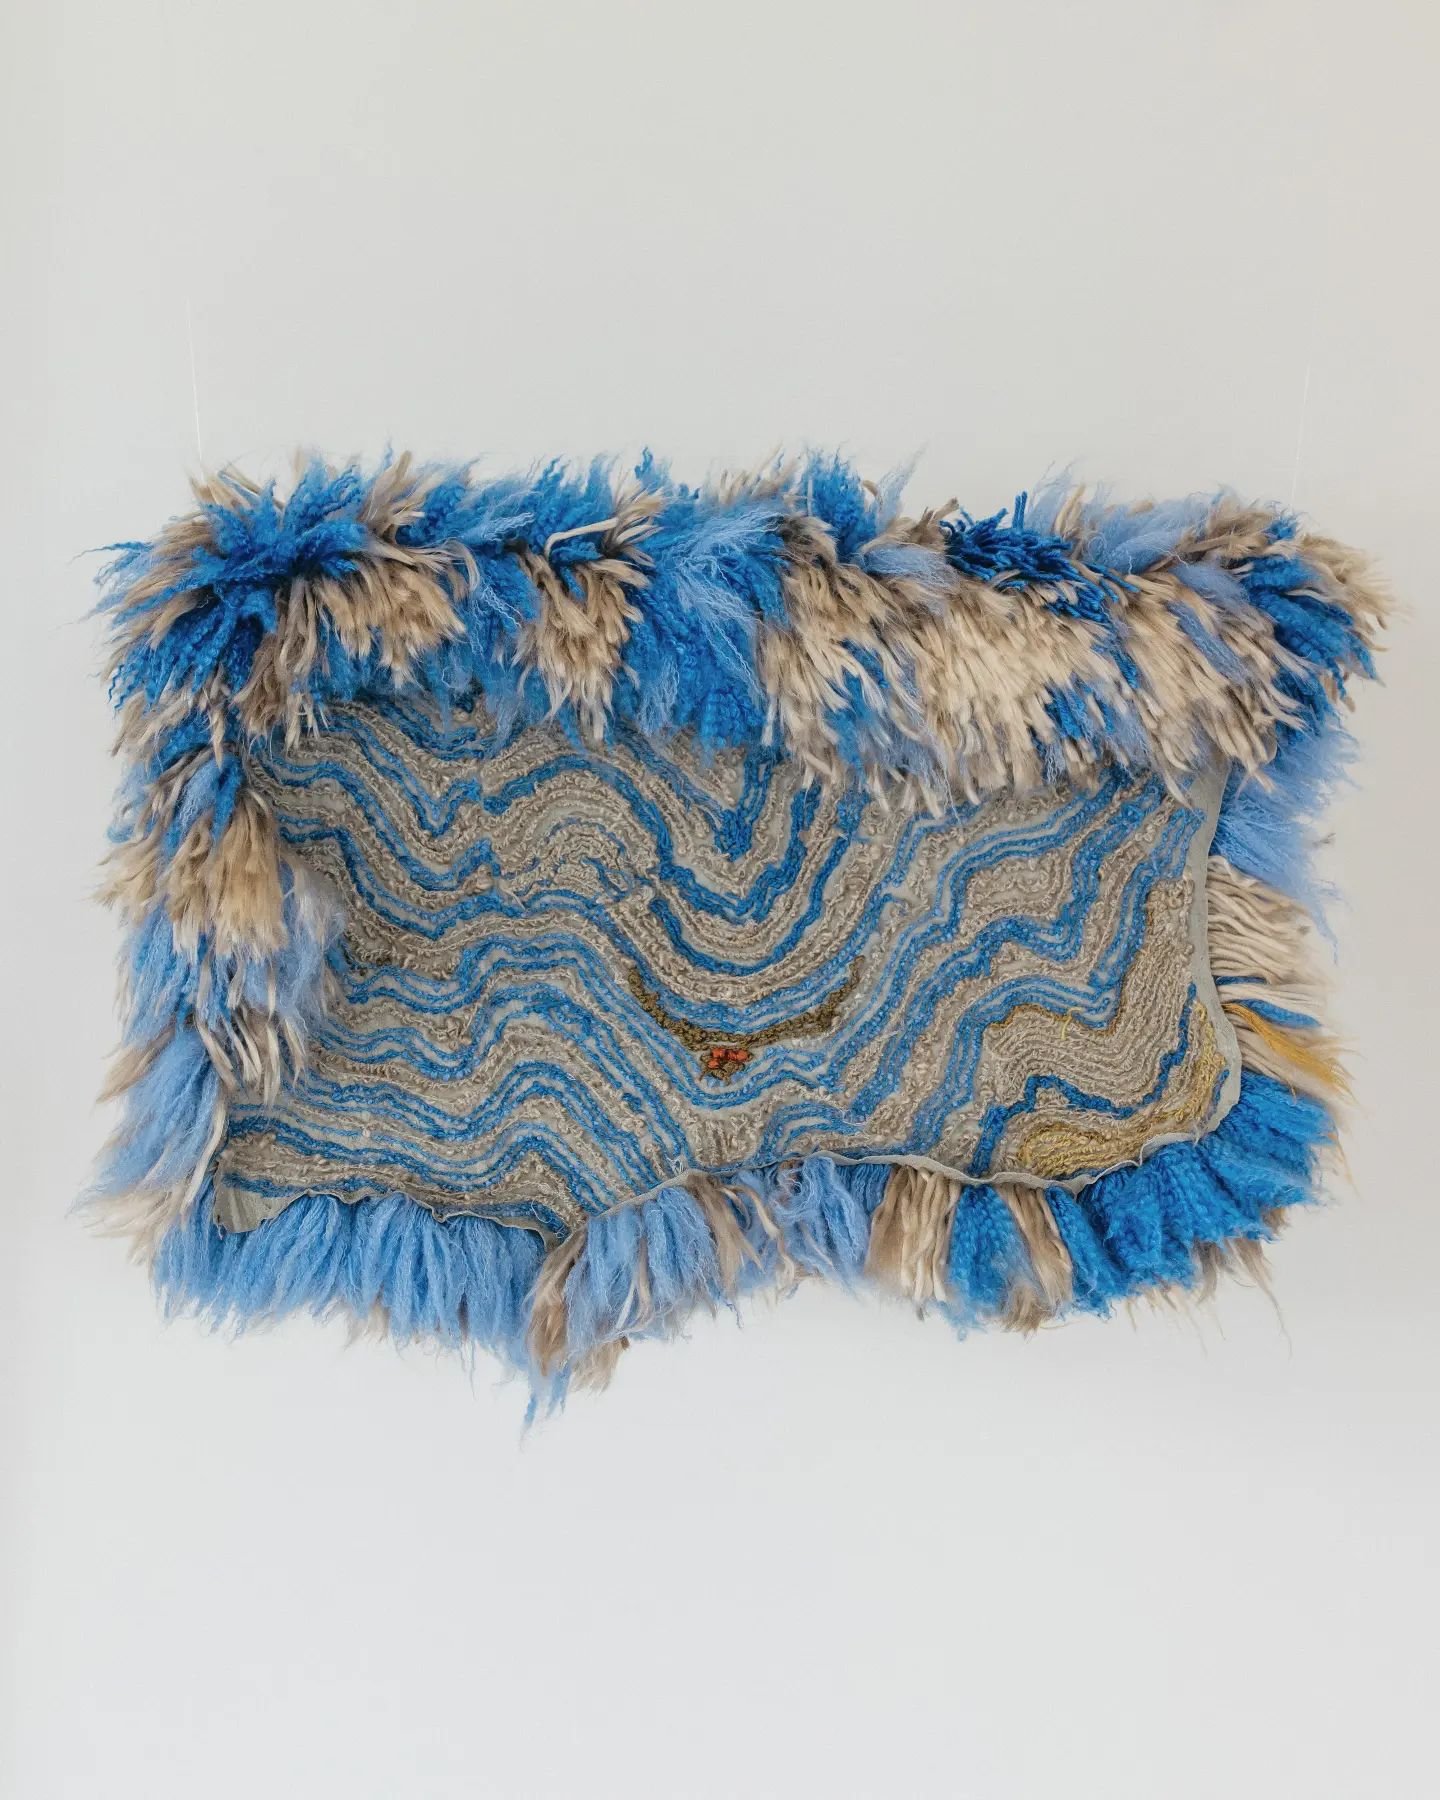 Hide for a Lamb (2024)
Lambskin, wool, silk, cotton, alpaca, linen, nylon, acrylic

Collapsed Ecologies now on at @austapestry as part of @ngvmelbourne Design Week

Exhibition runs until 7 June, 2024
262 - 266  Park St, South Melbourne

Image: @marie